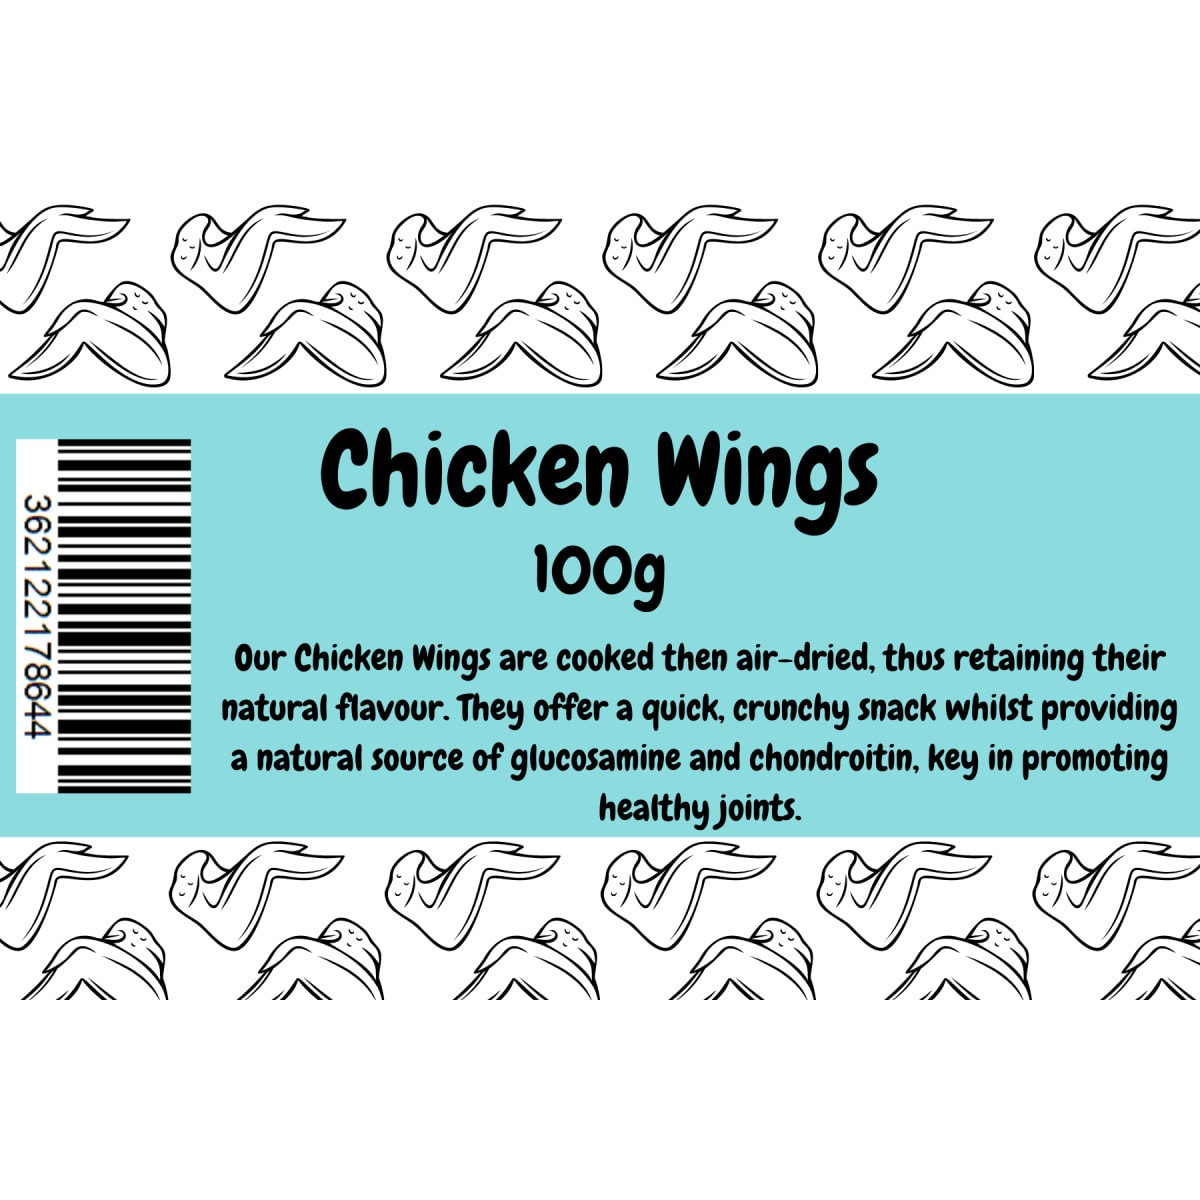 Chicken Wings 100g Main Image